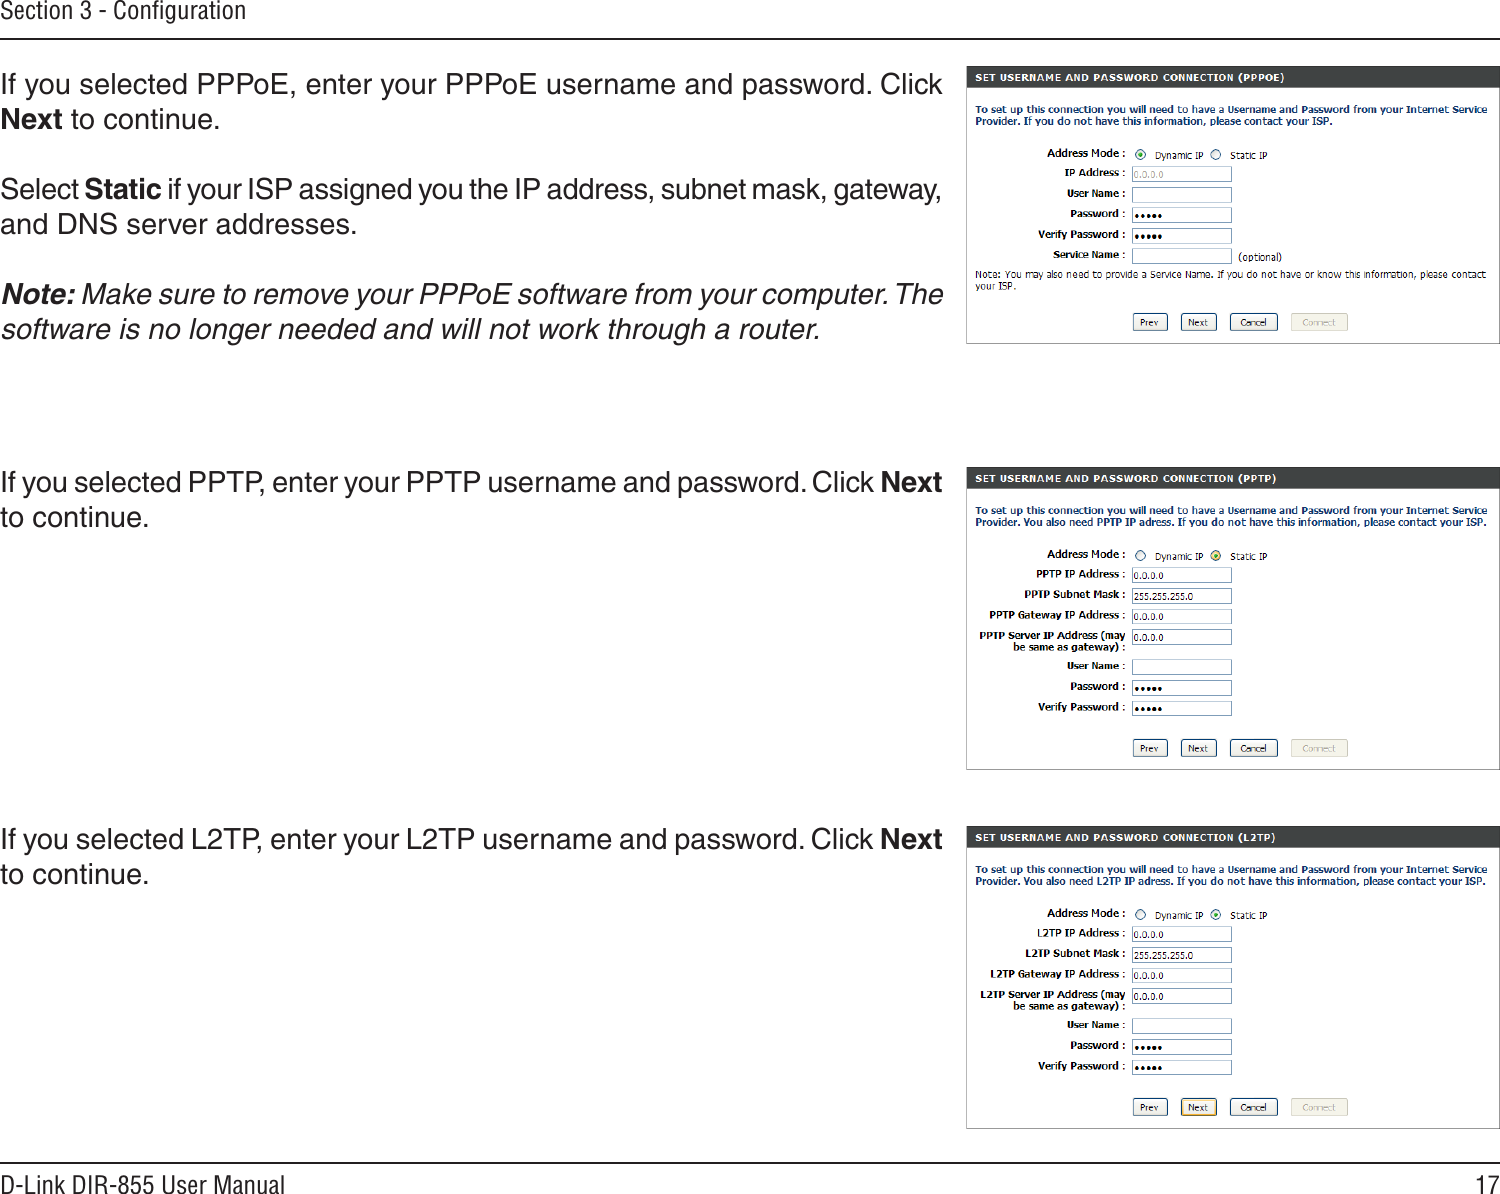 17D-Link DIR-855 User ManualSection 3 - ConﬁgurationIf you selected PPPoE, enter your PPPoE username and password. Click Next to continue.Select Static if your ISP assigned you the IP address, subnet mask, gateway, and DNS server addresses.Note: Make sure to remove your PPPoE software from your computer. The software is no longer needed and will not work through a router.If you selected PPTP, enter your PPTP username and password. Click Next to continue.If you selected L2TP, enter your L2TP username and password. Click Next to continue.